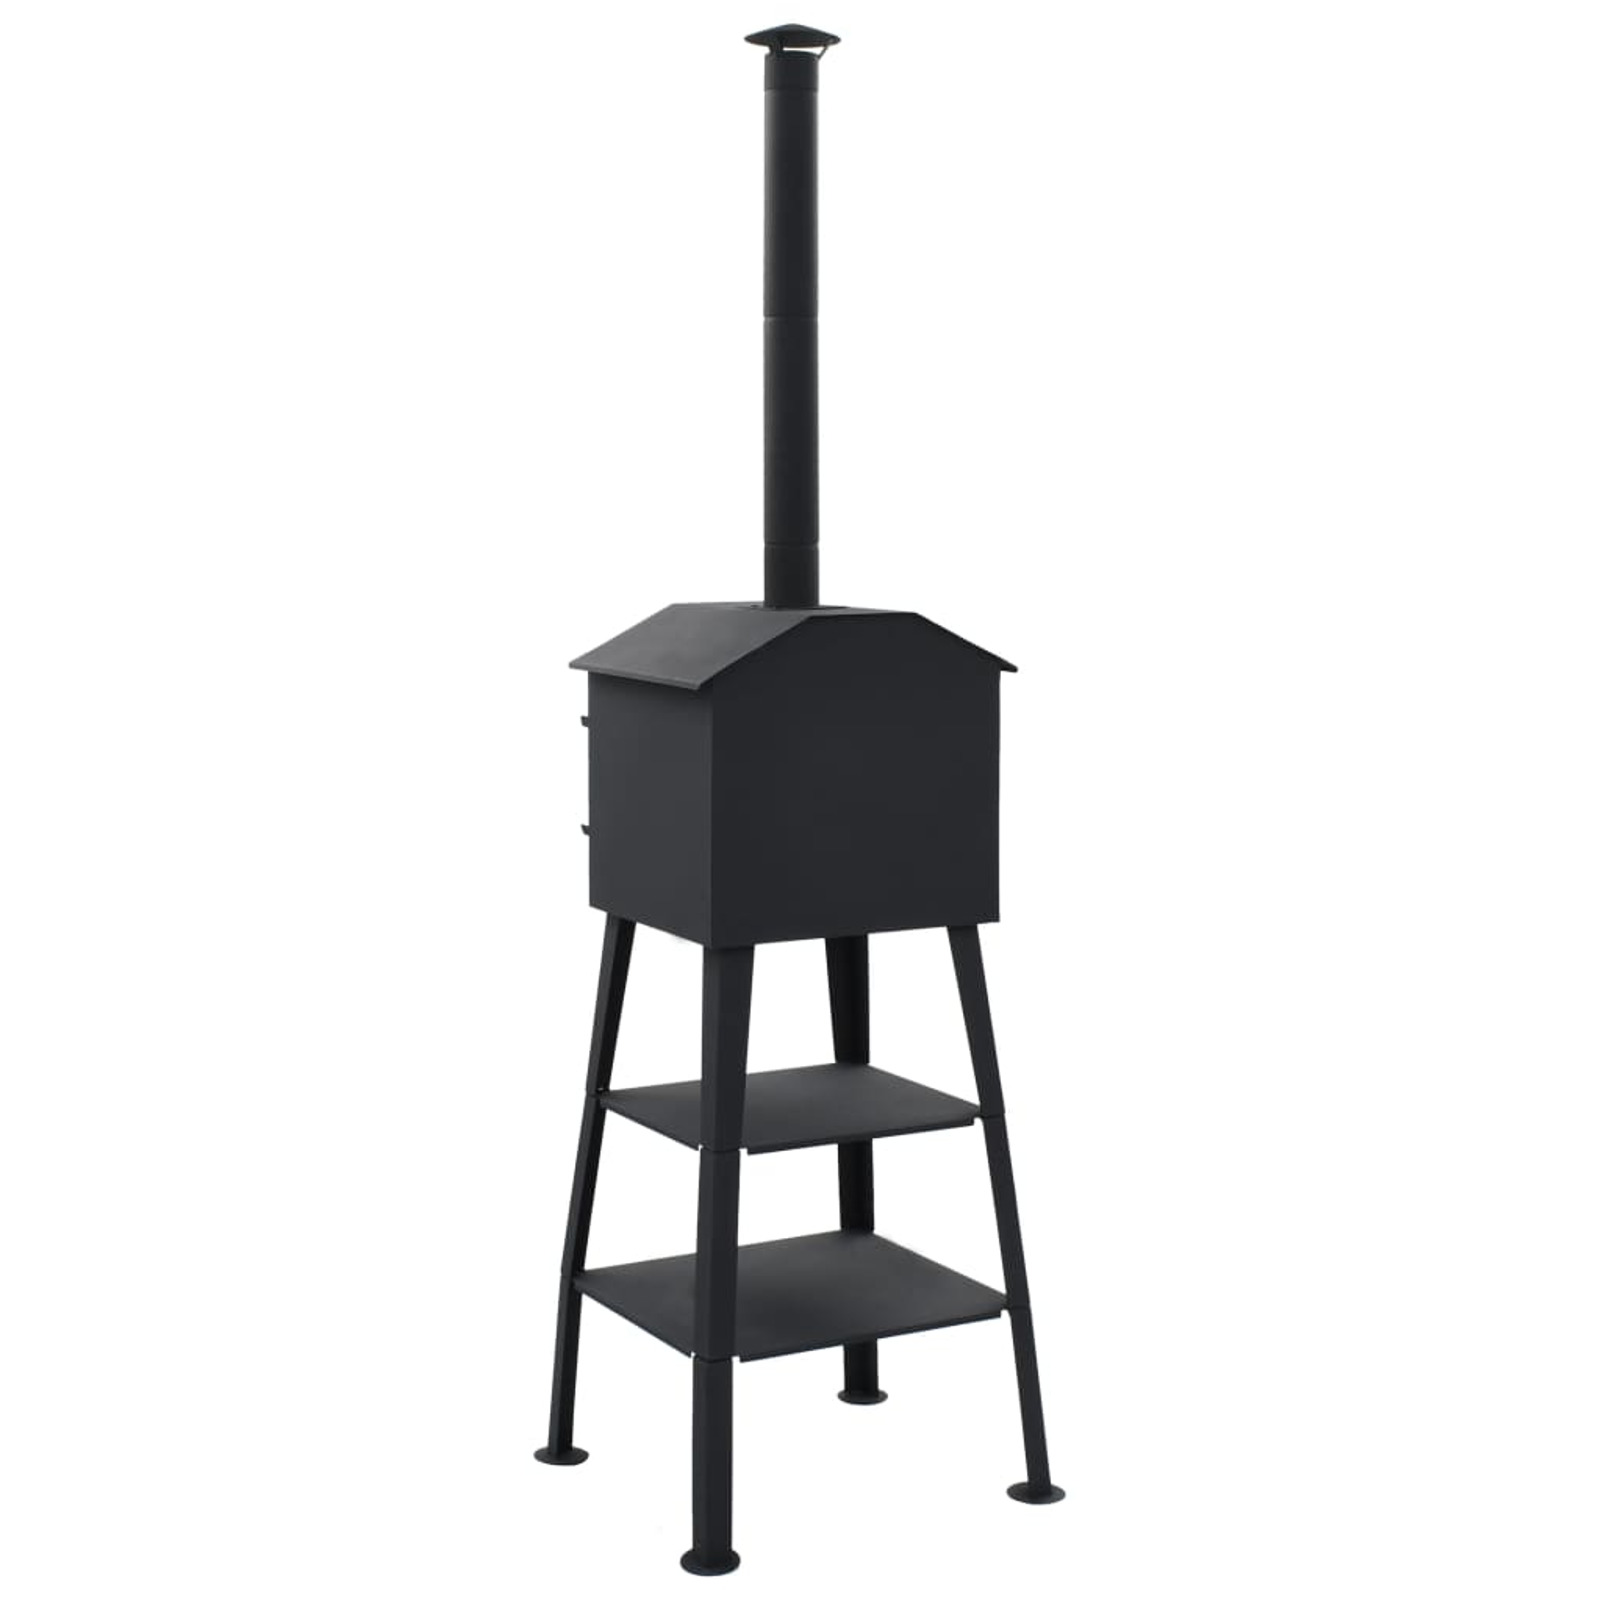 Dcenta Outdoor Pizza Oven Charcoal-Fired with 2 Fireclay Stones for Garden Chimney BBQ Smoker Bread - image 5 of 7